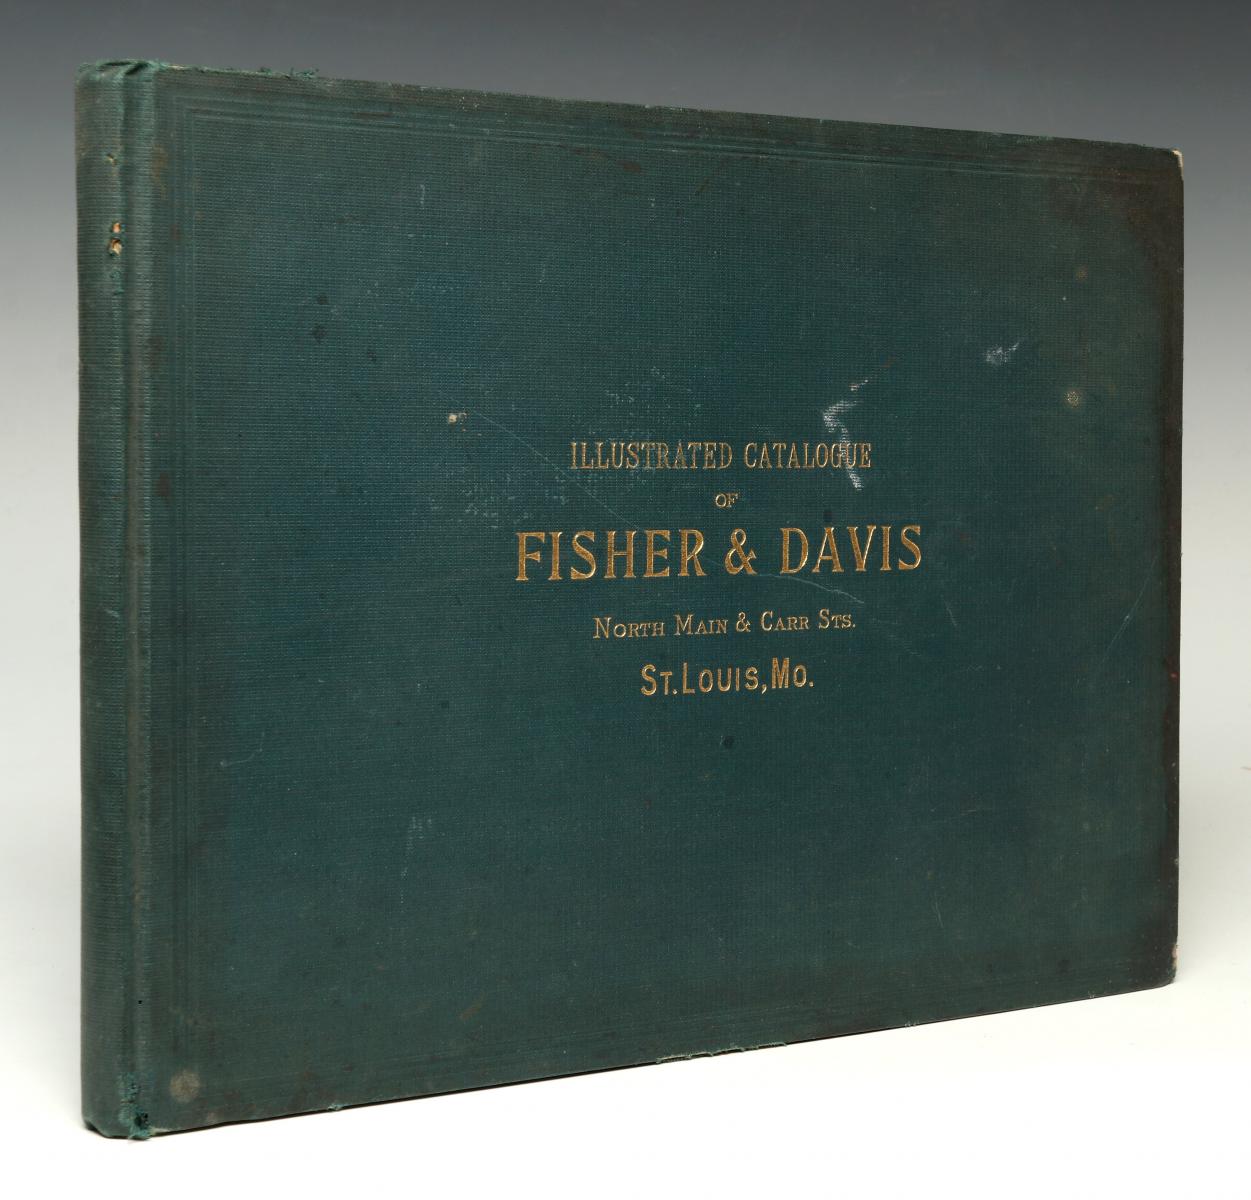 AN 1898 FISHER & DAVIS ENGINES AND BOILERS CATALOG